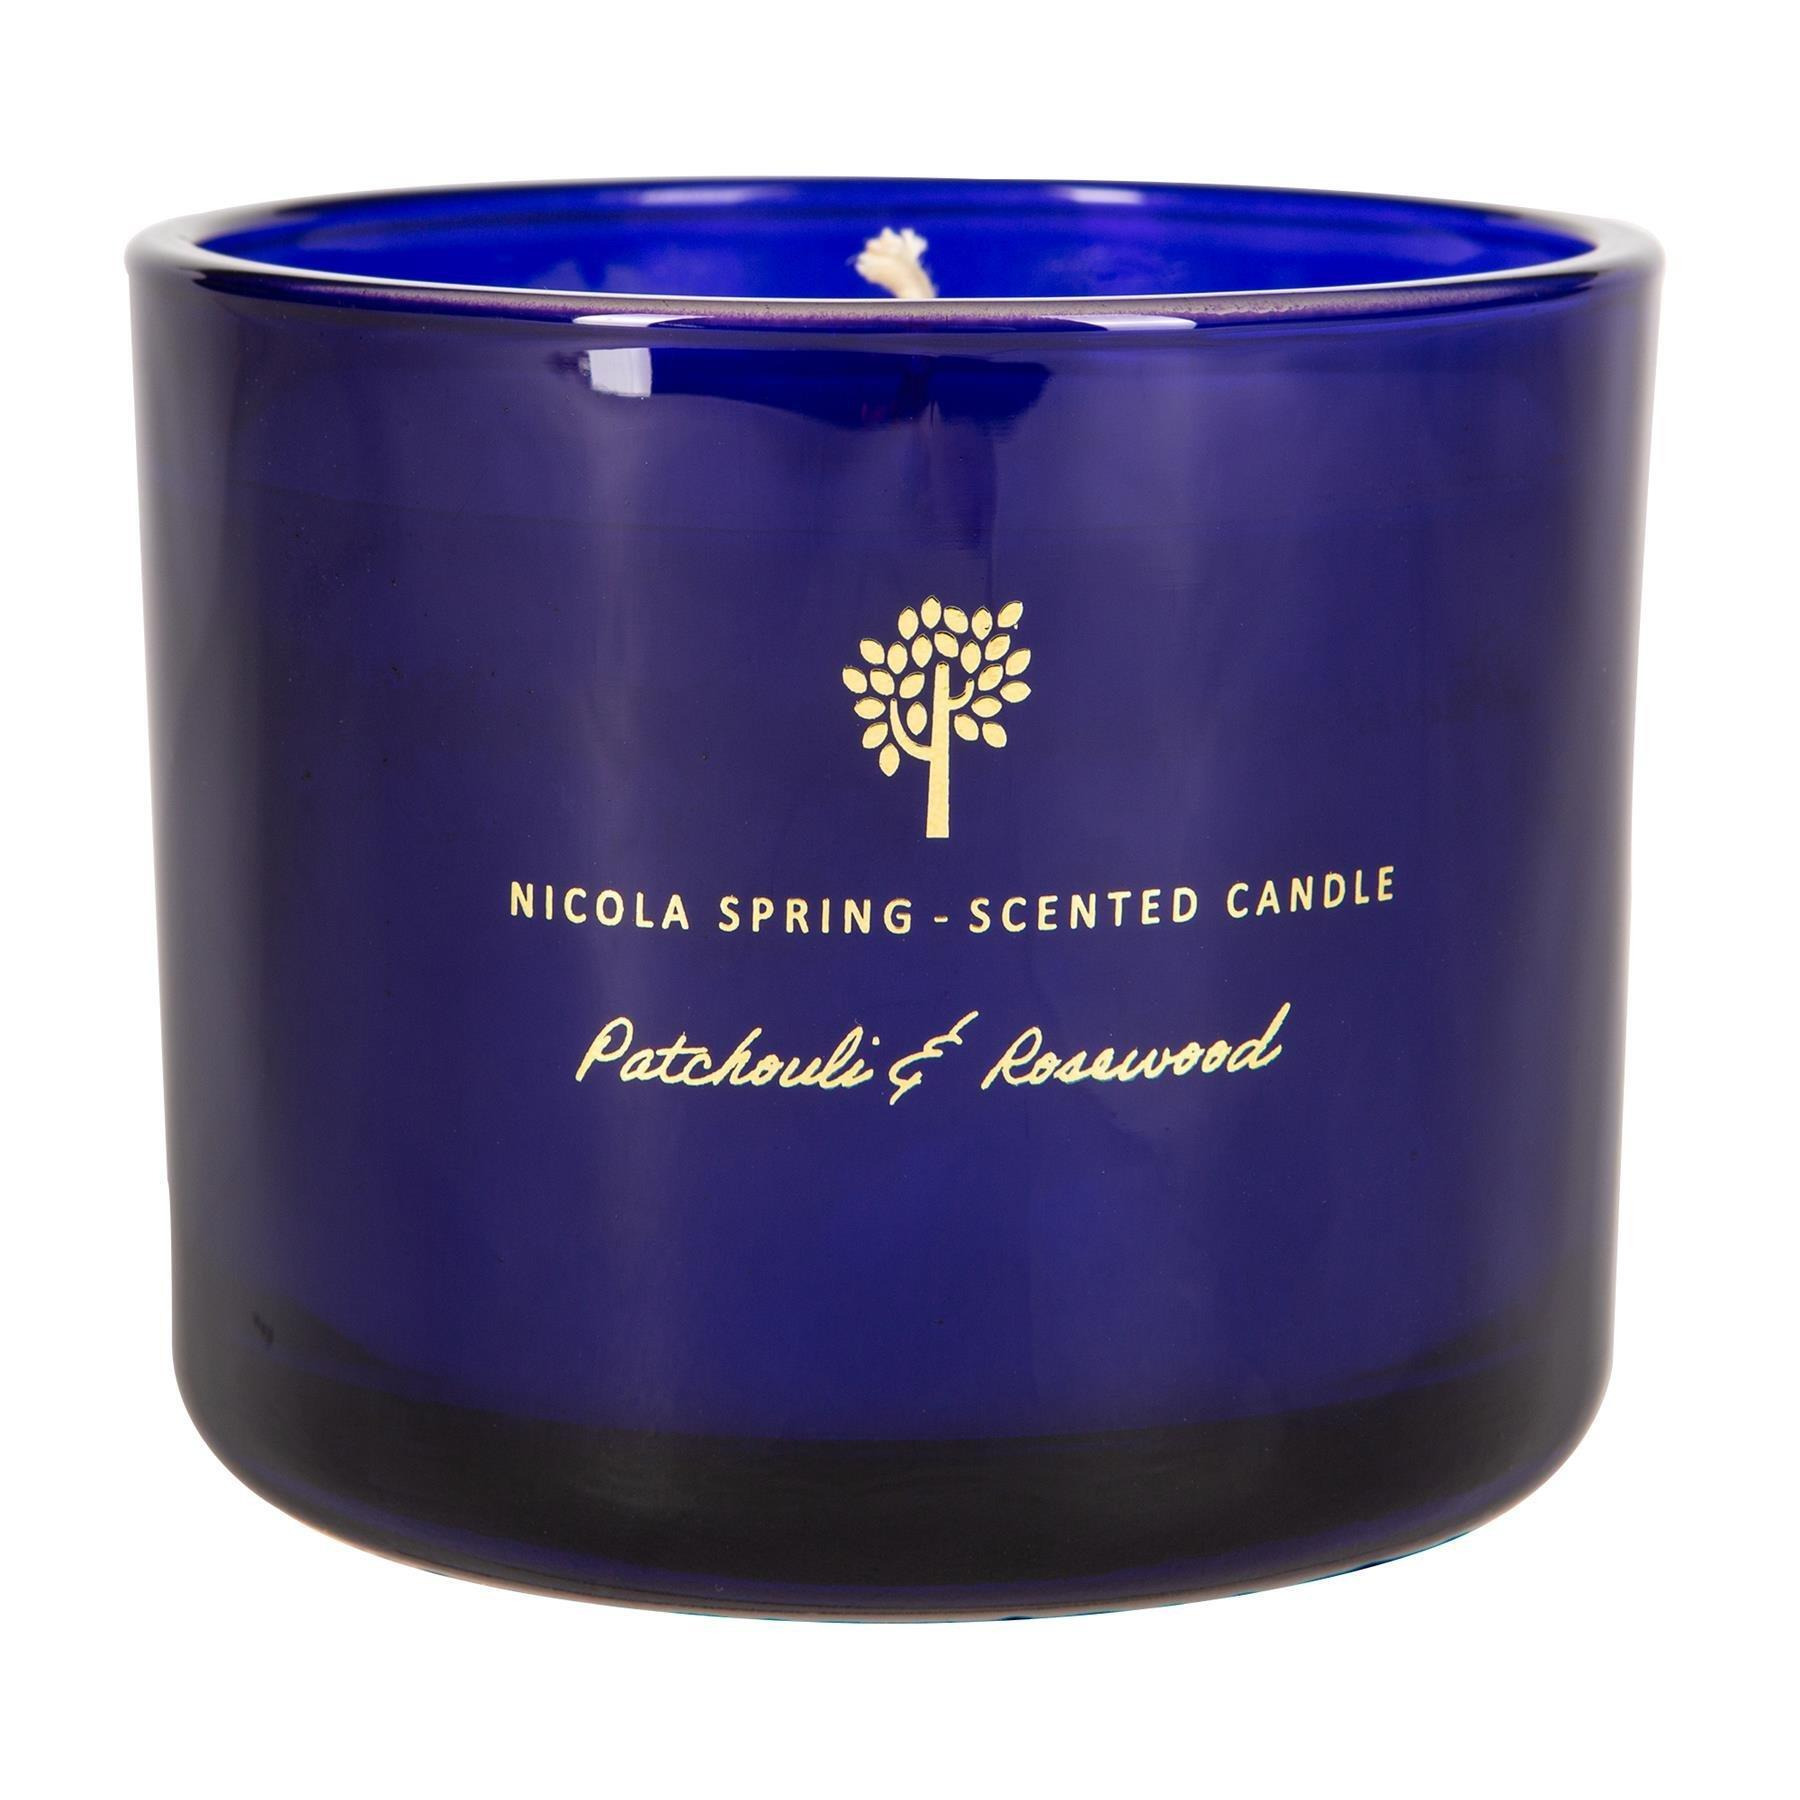 Soy Wax Scented Candle 300g Patchouli & Rosewood - image 1